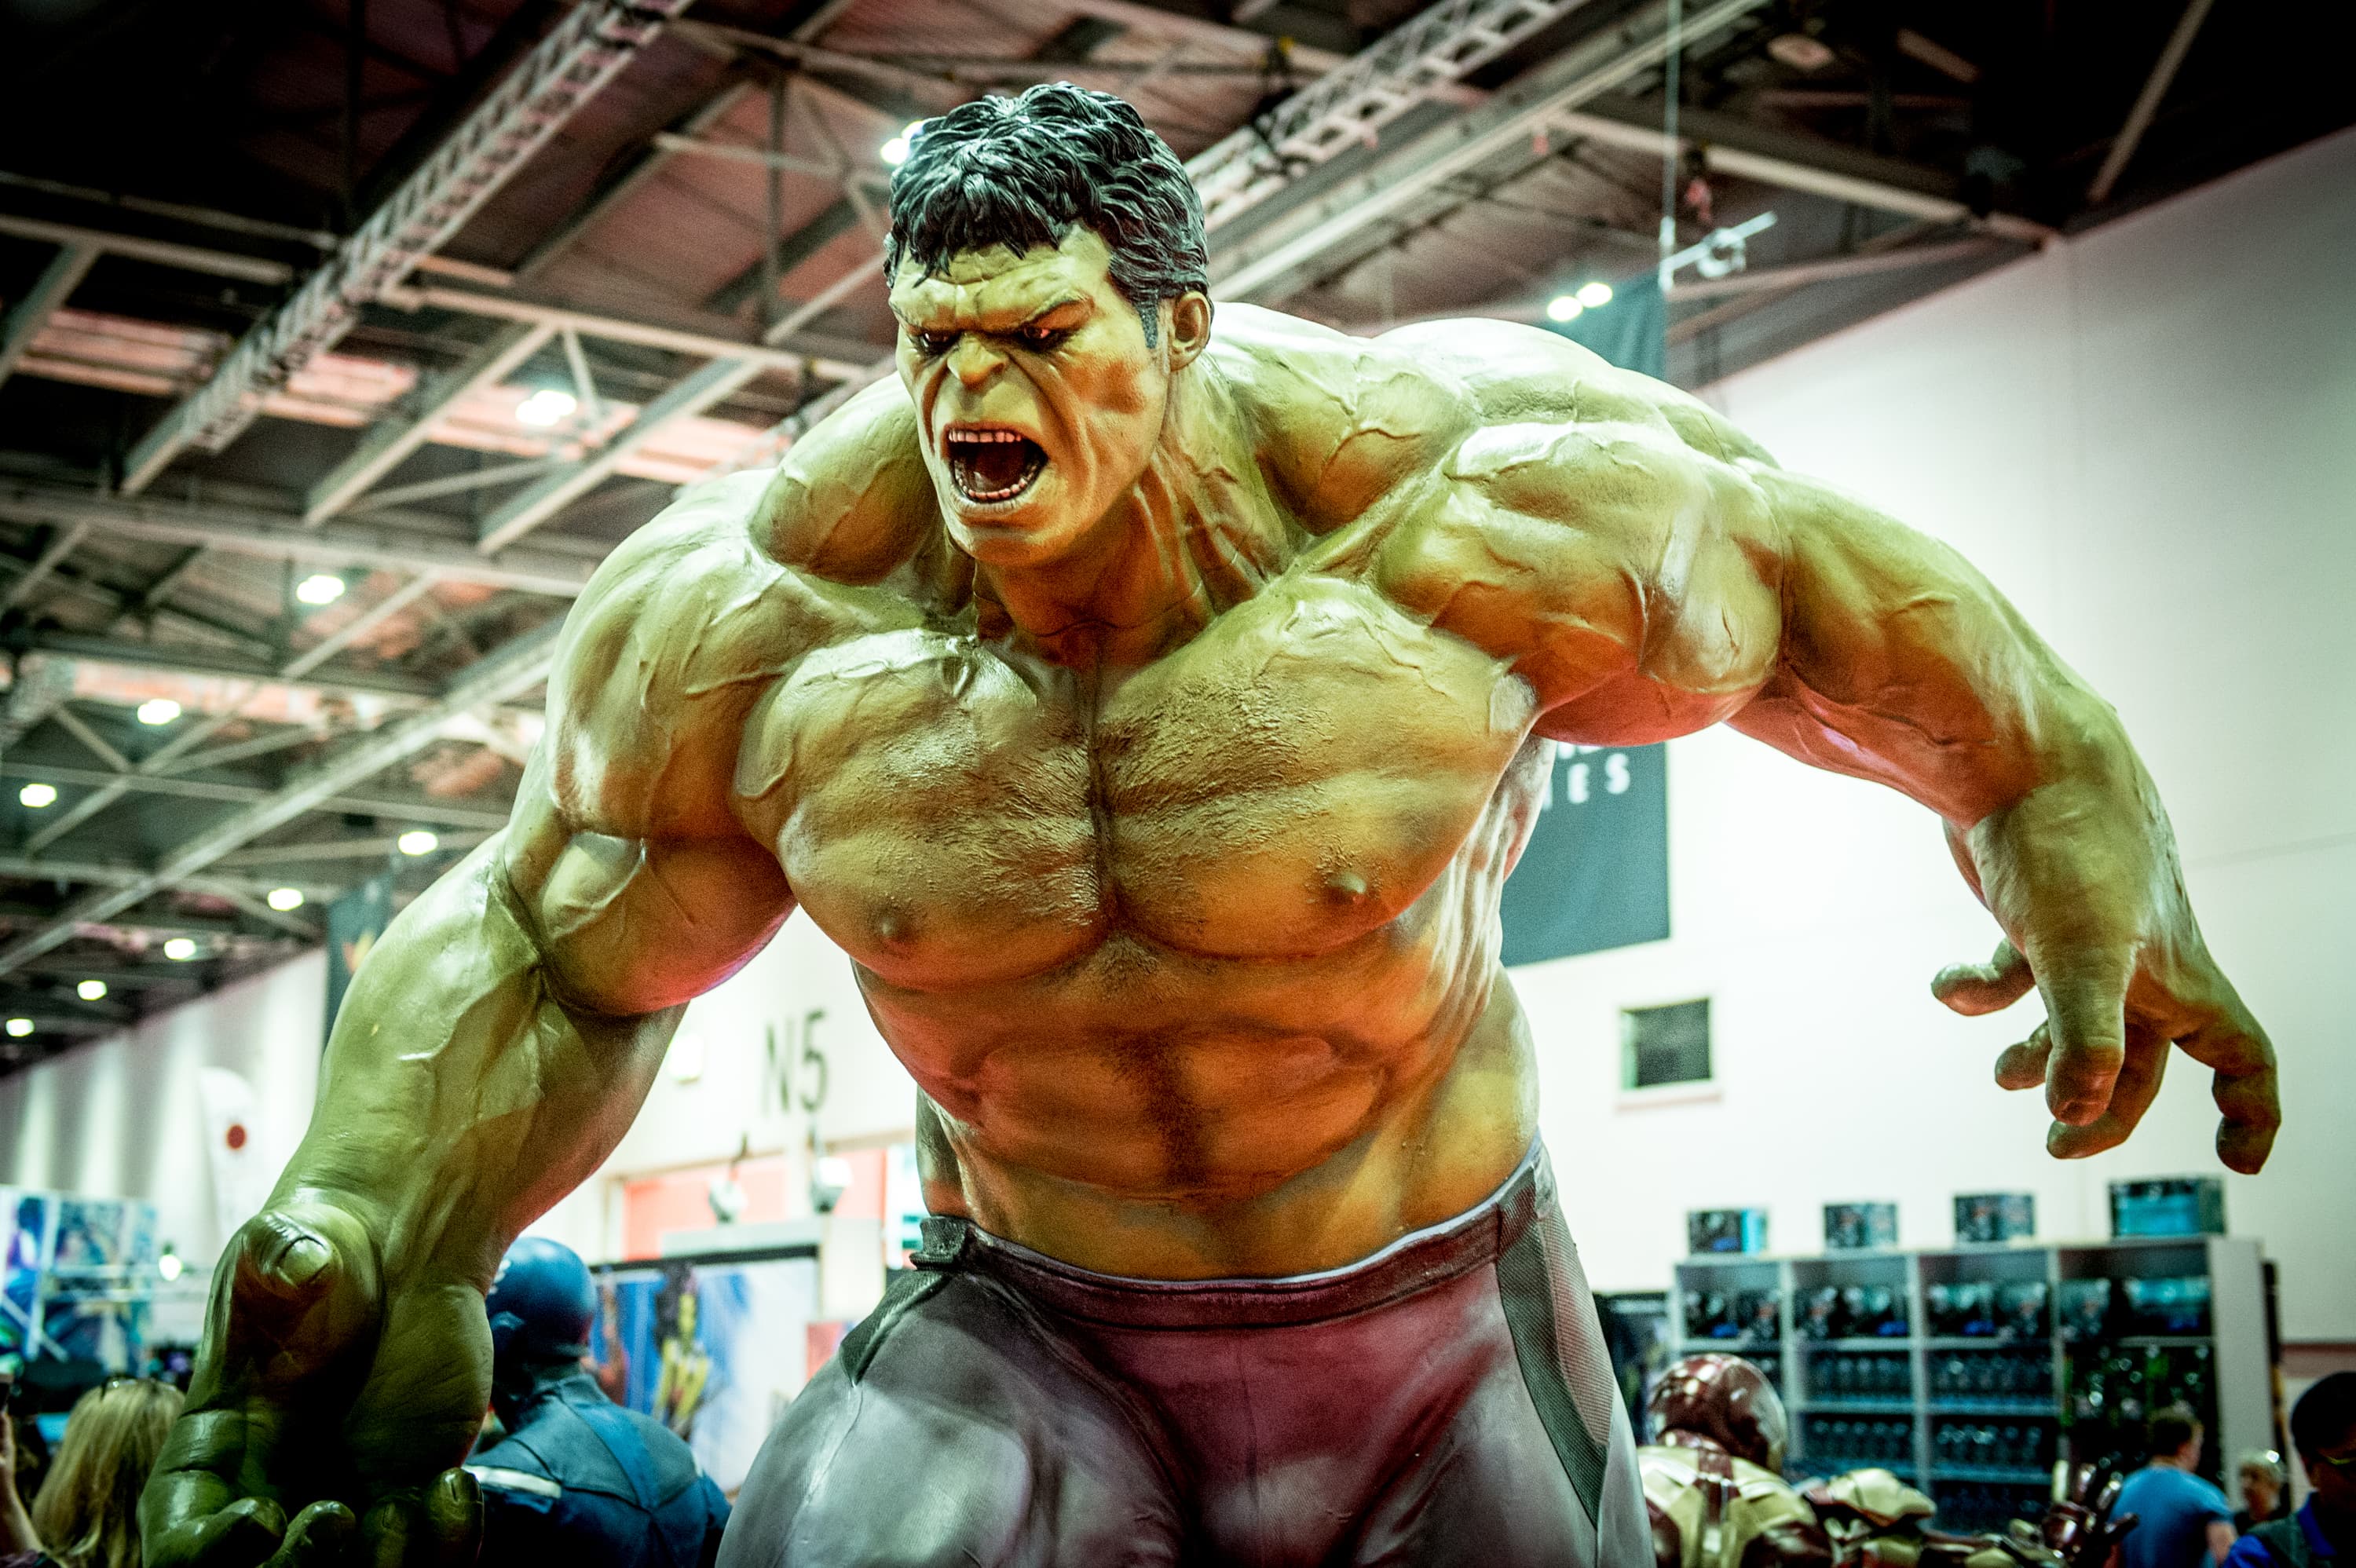 Marvel's post-'Endgame' anger-management issue: The Incredible Hulk's future